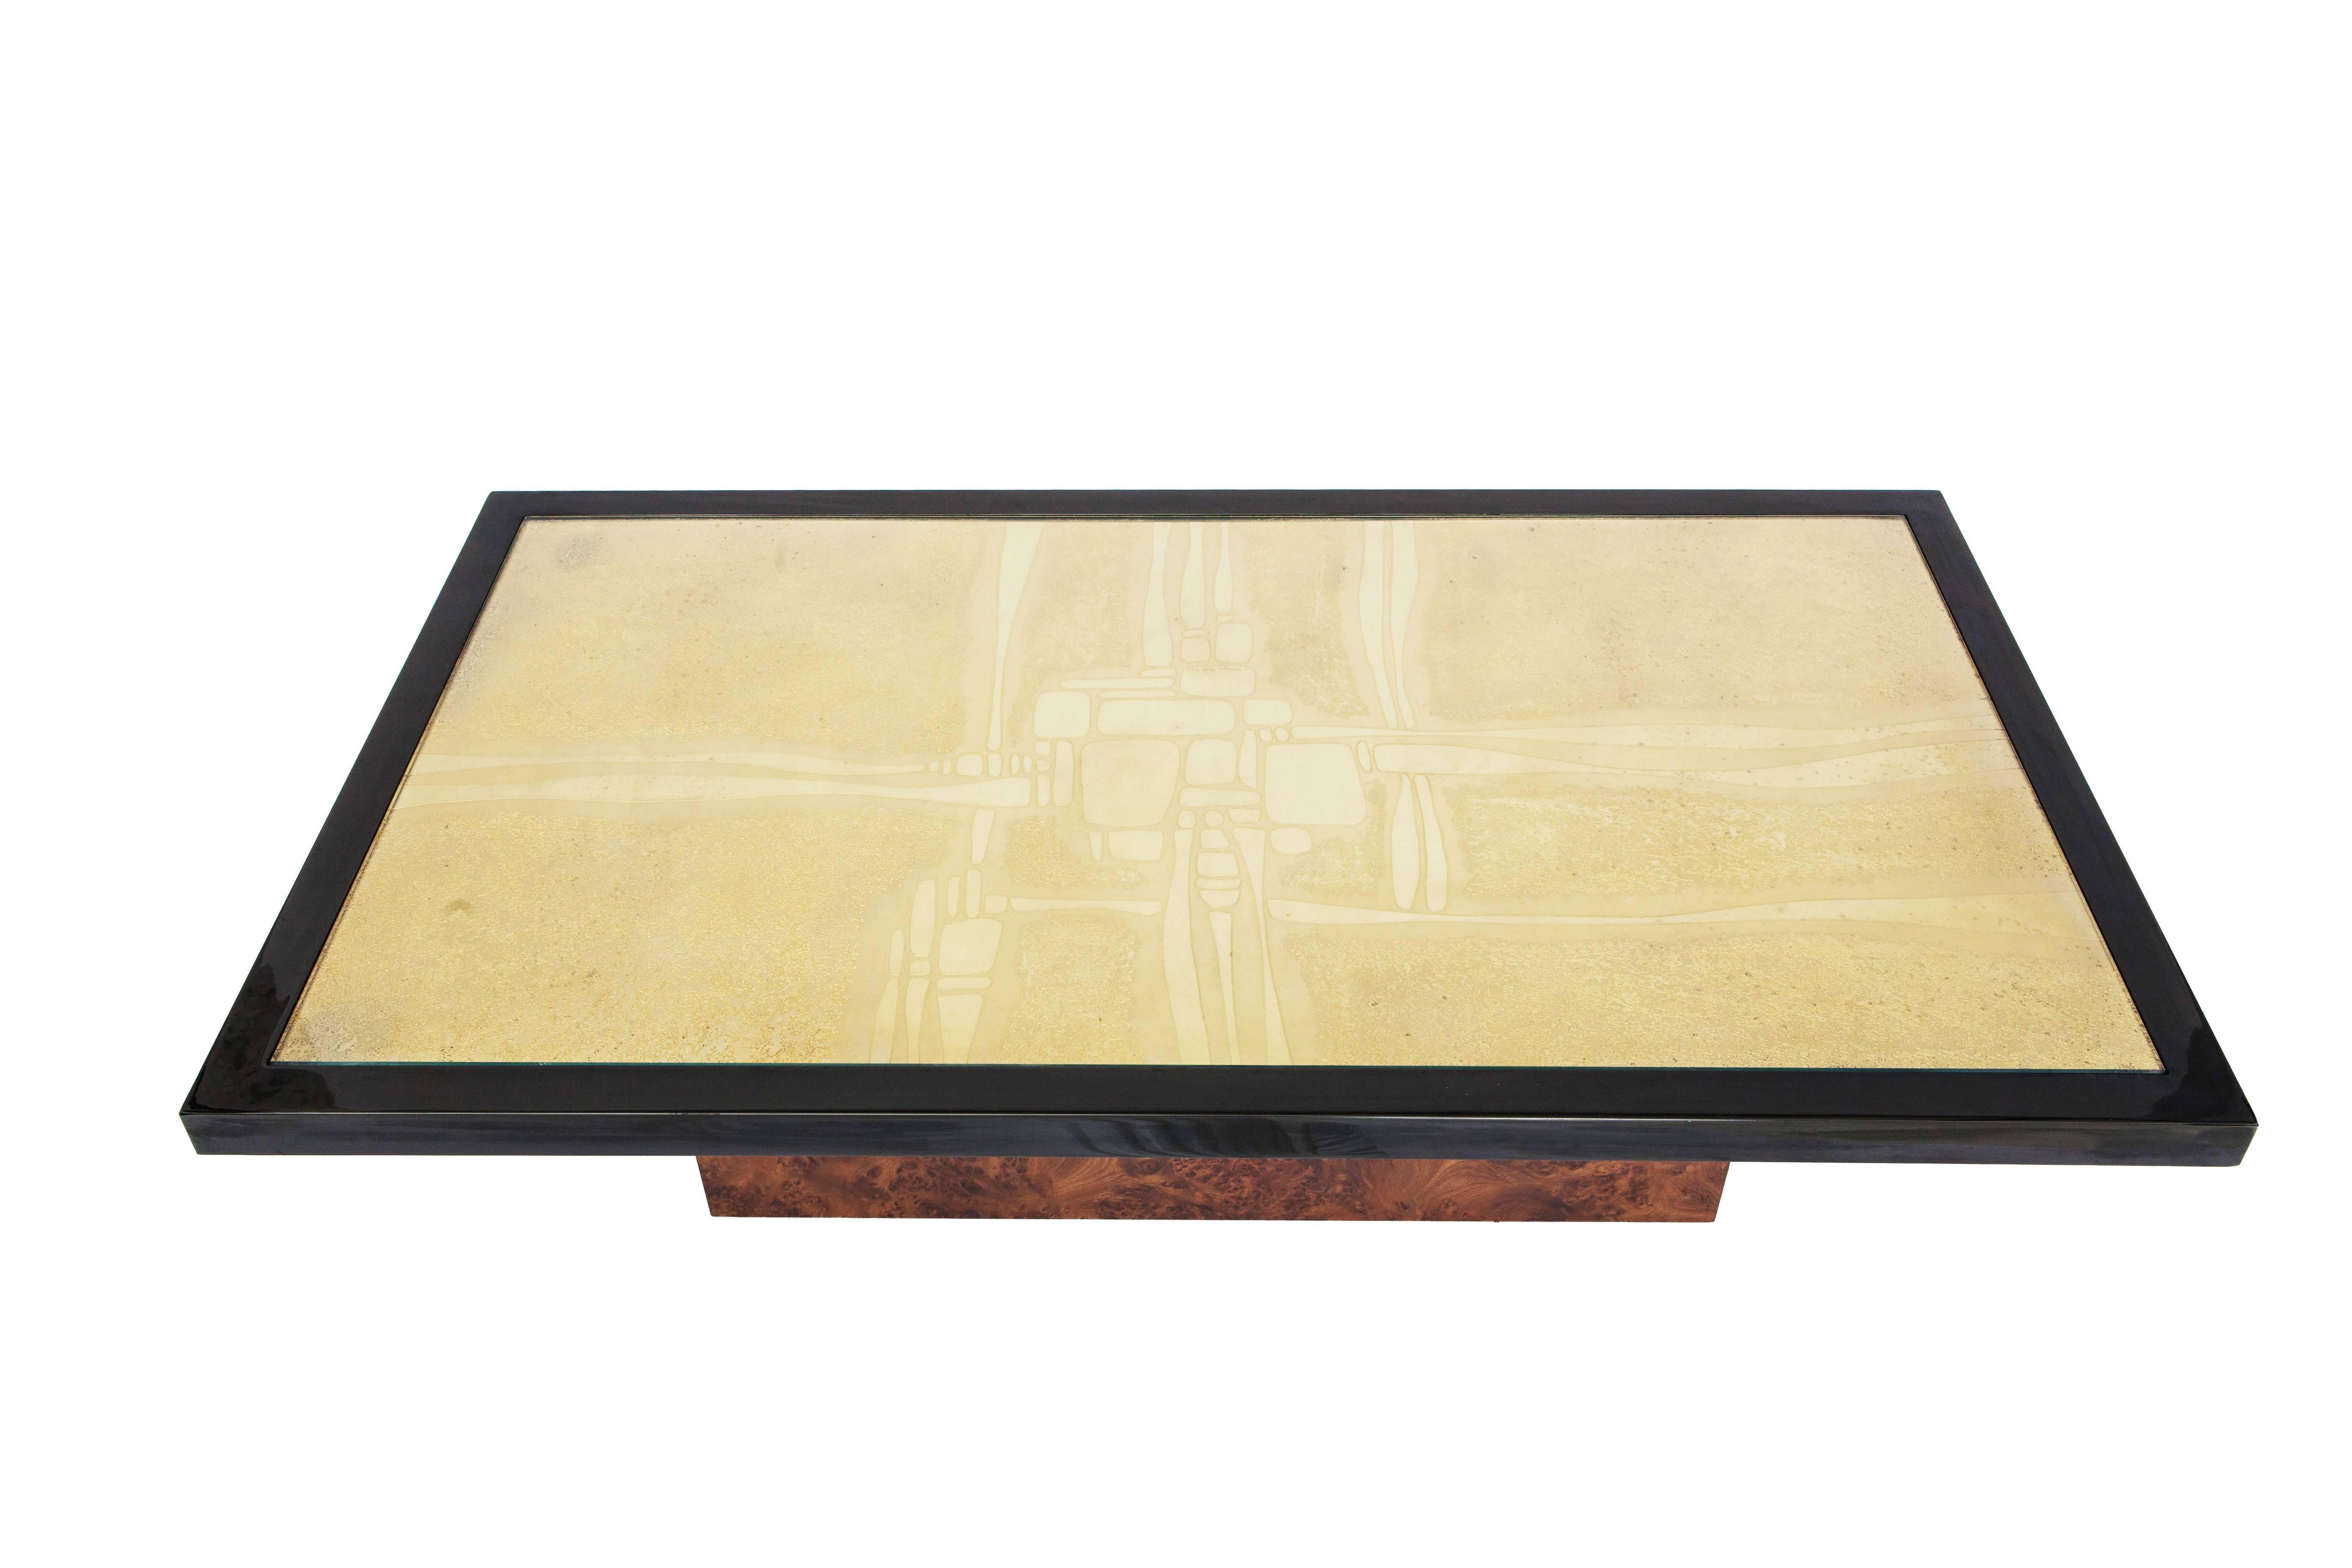 Hollywood Regency brass etched coffee table, Maho 3/250.
Brass etched artwork signed and numbered,
Black lacquered frame on burl base.
Belgium, 1970s.
Would fit well in an eclectic interior inspired by Maison Jansen, Ado Chale or Willy Daro.
  